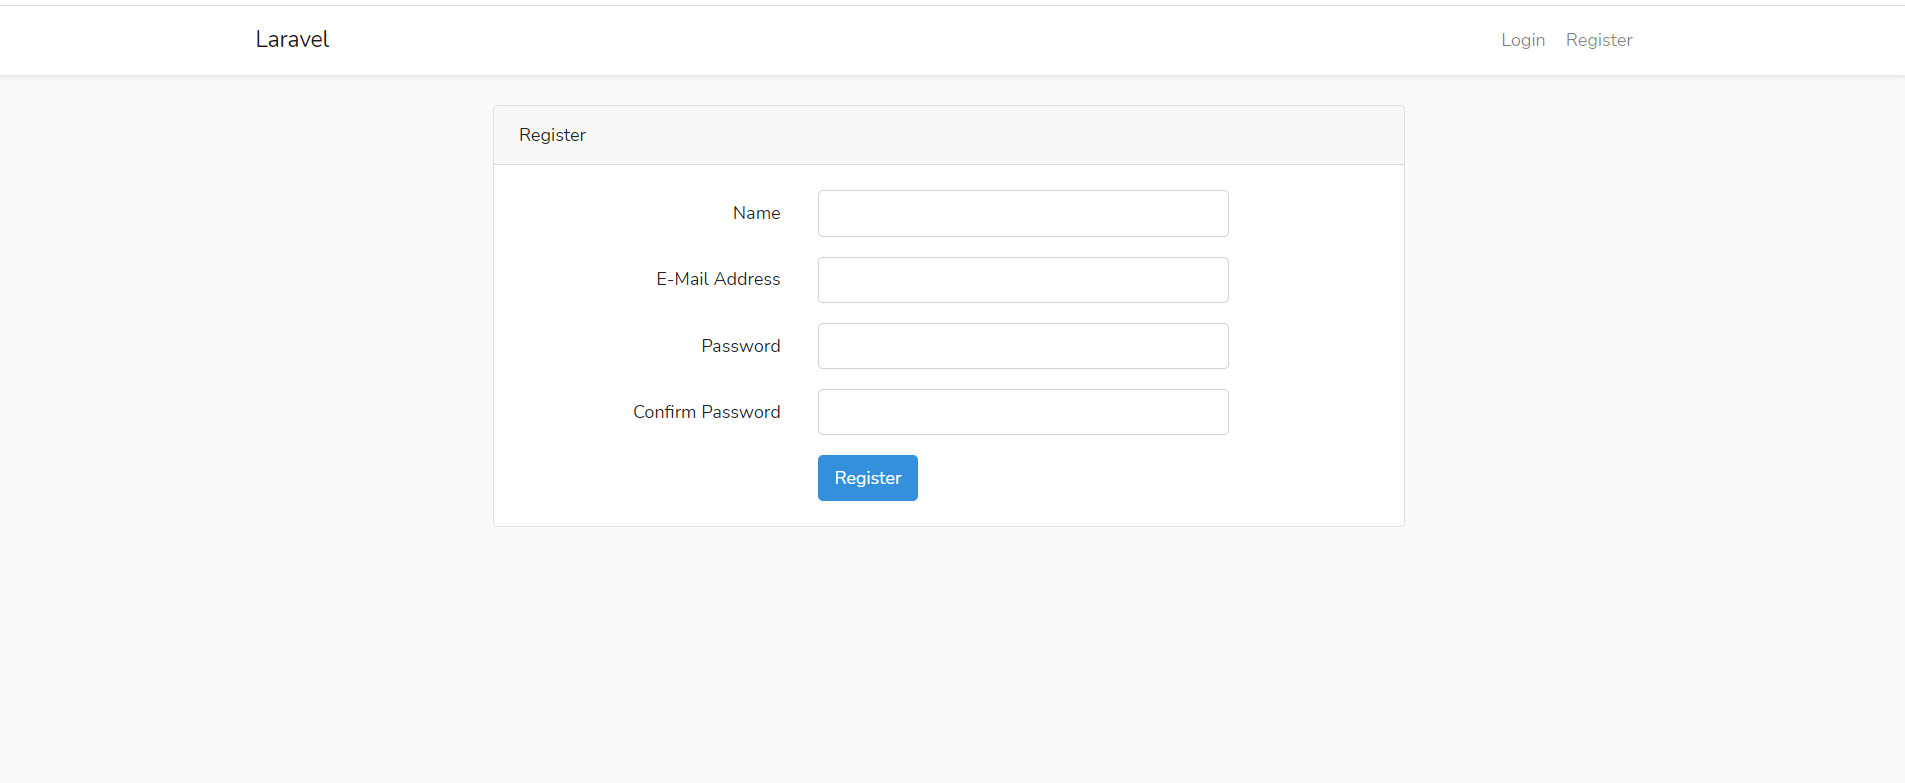 Login register. Ангуляр-ларавел. Register Page. Auth close. Private auth